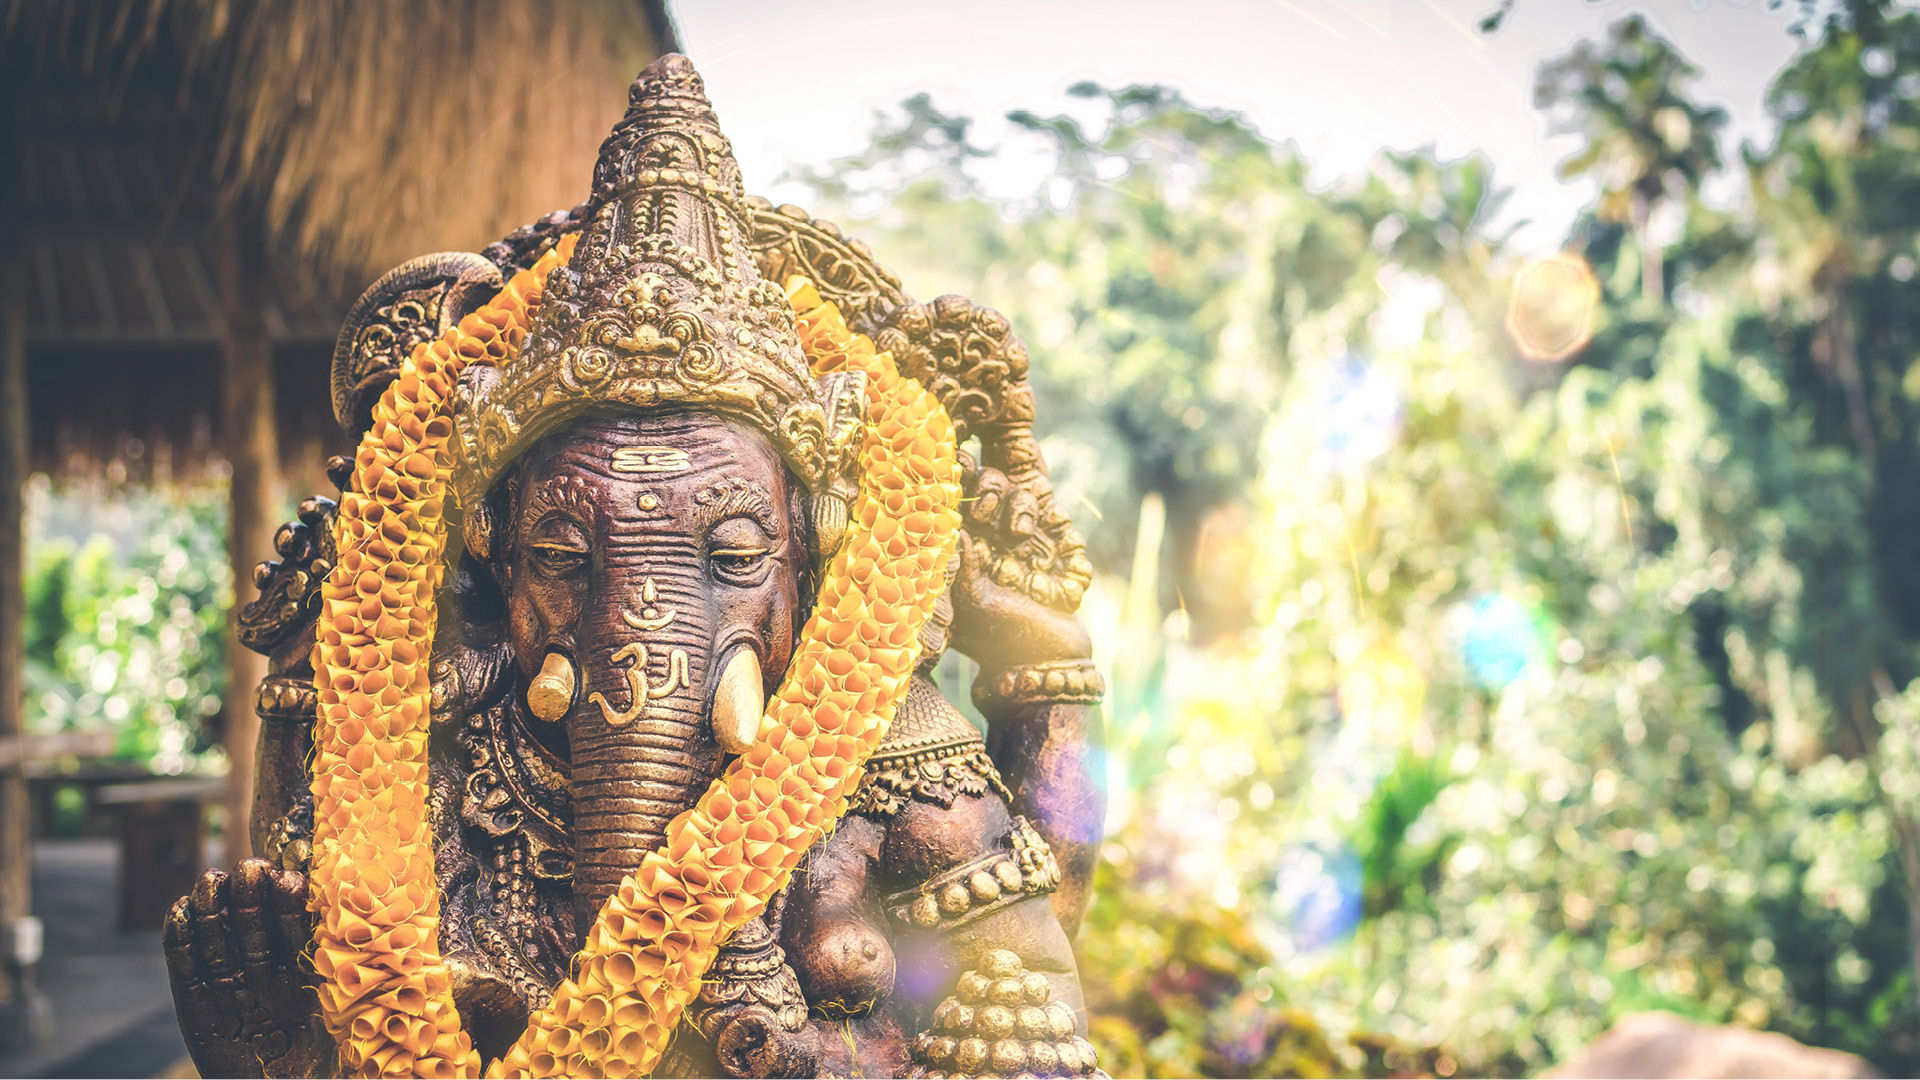 The Essential Guide To Celebrating Ganesh Chaturthi This Year In Mumbai